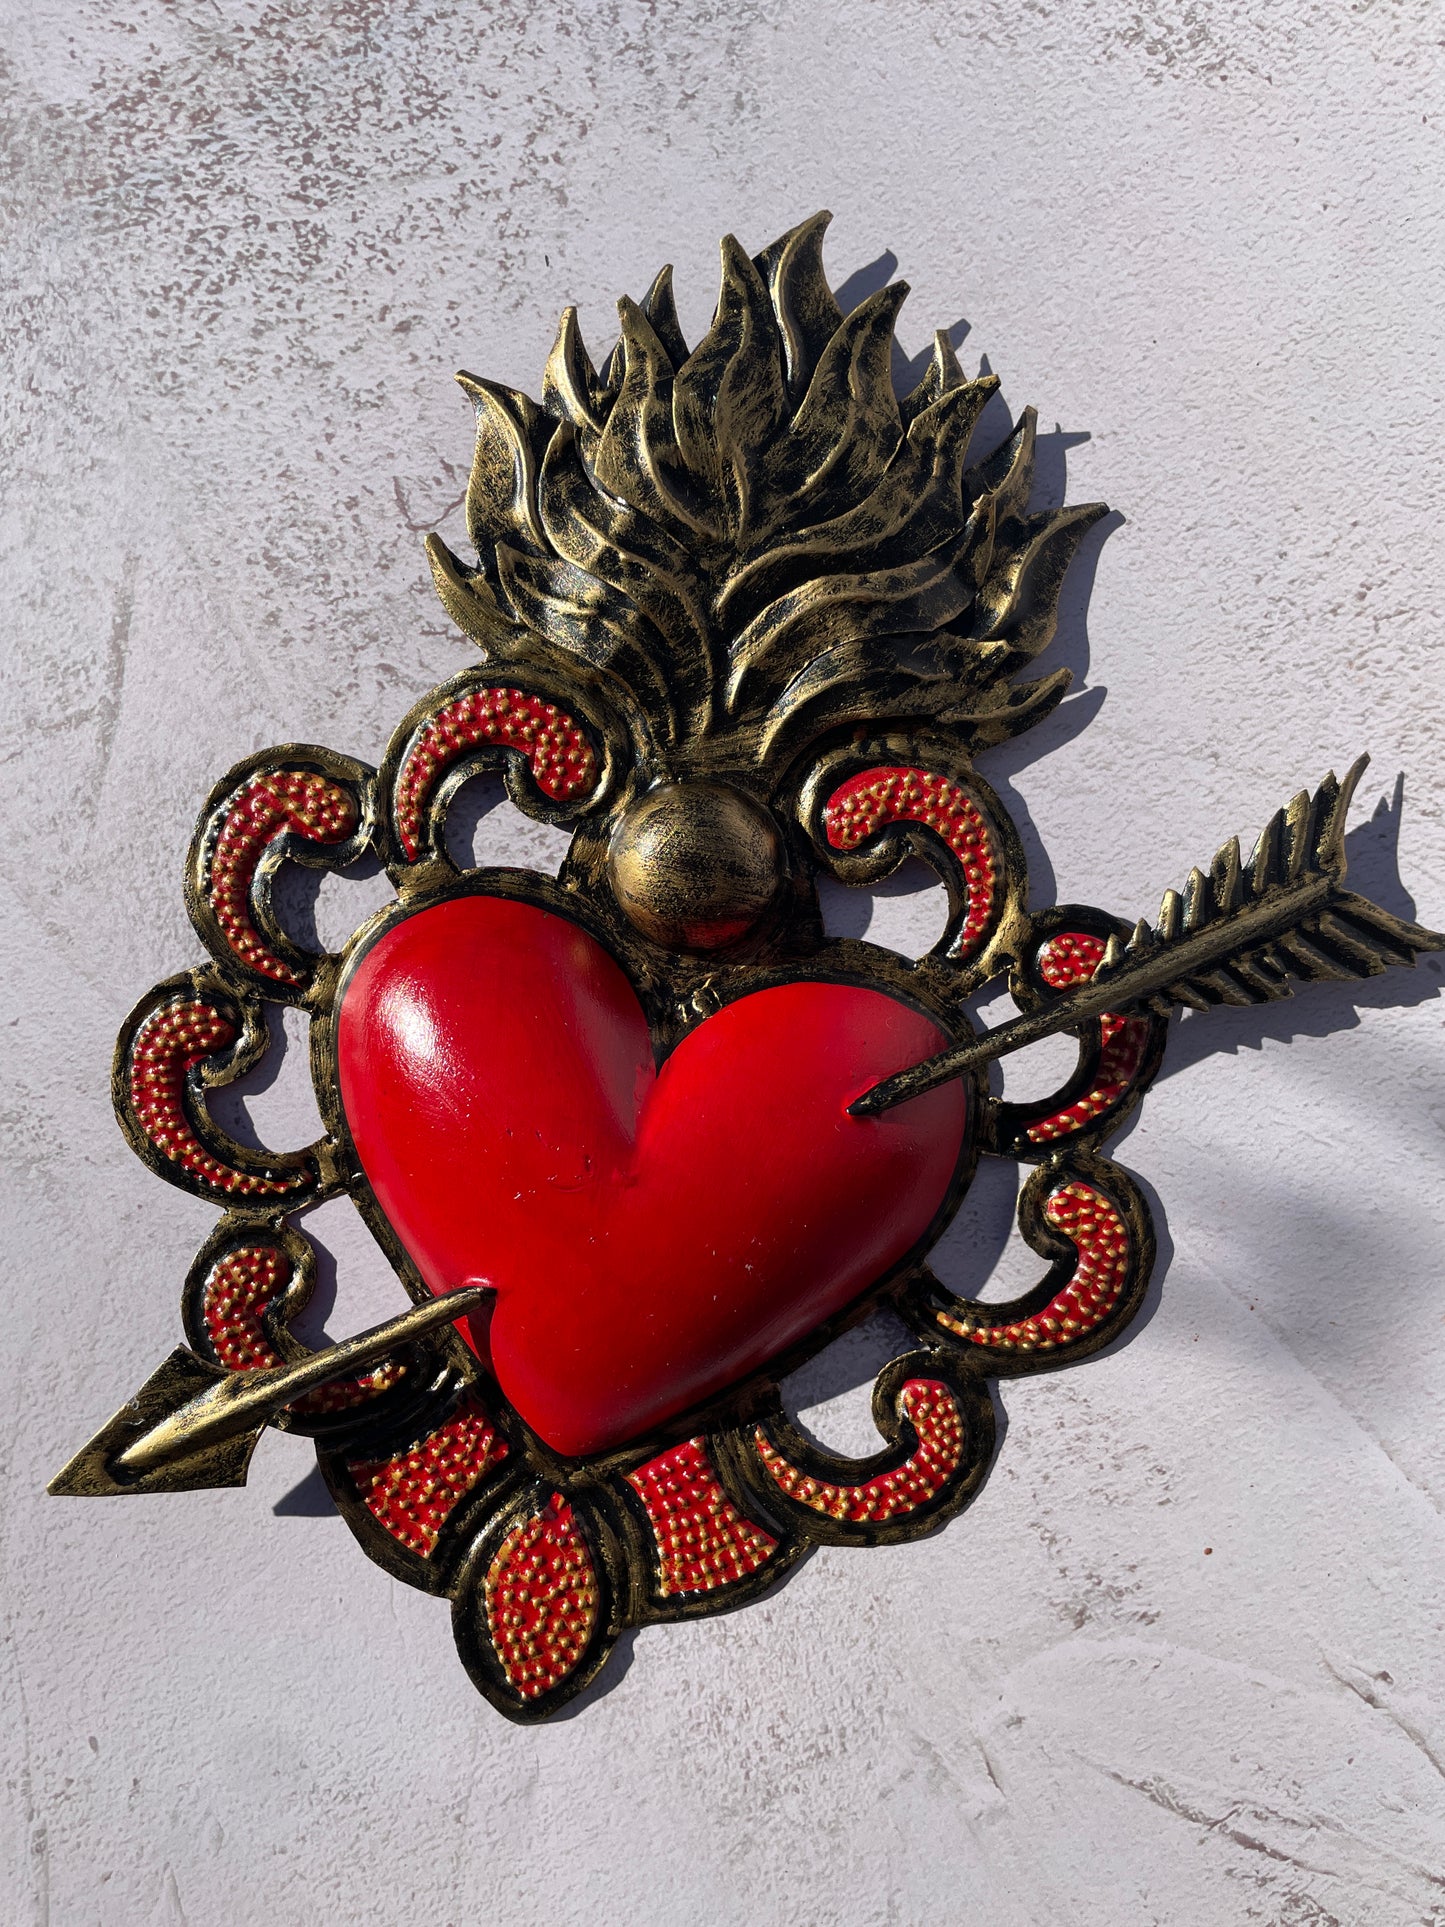 Mexican Hand Painted Tin Heart Corazon Hojalata Corazon de Hojalata Corazon Corazon